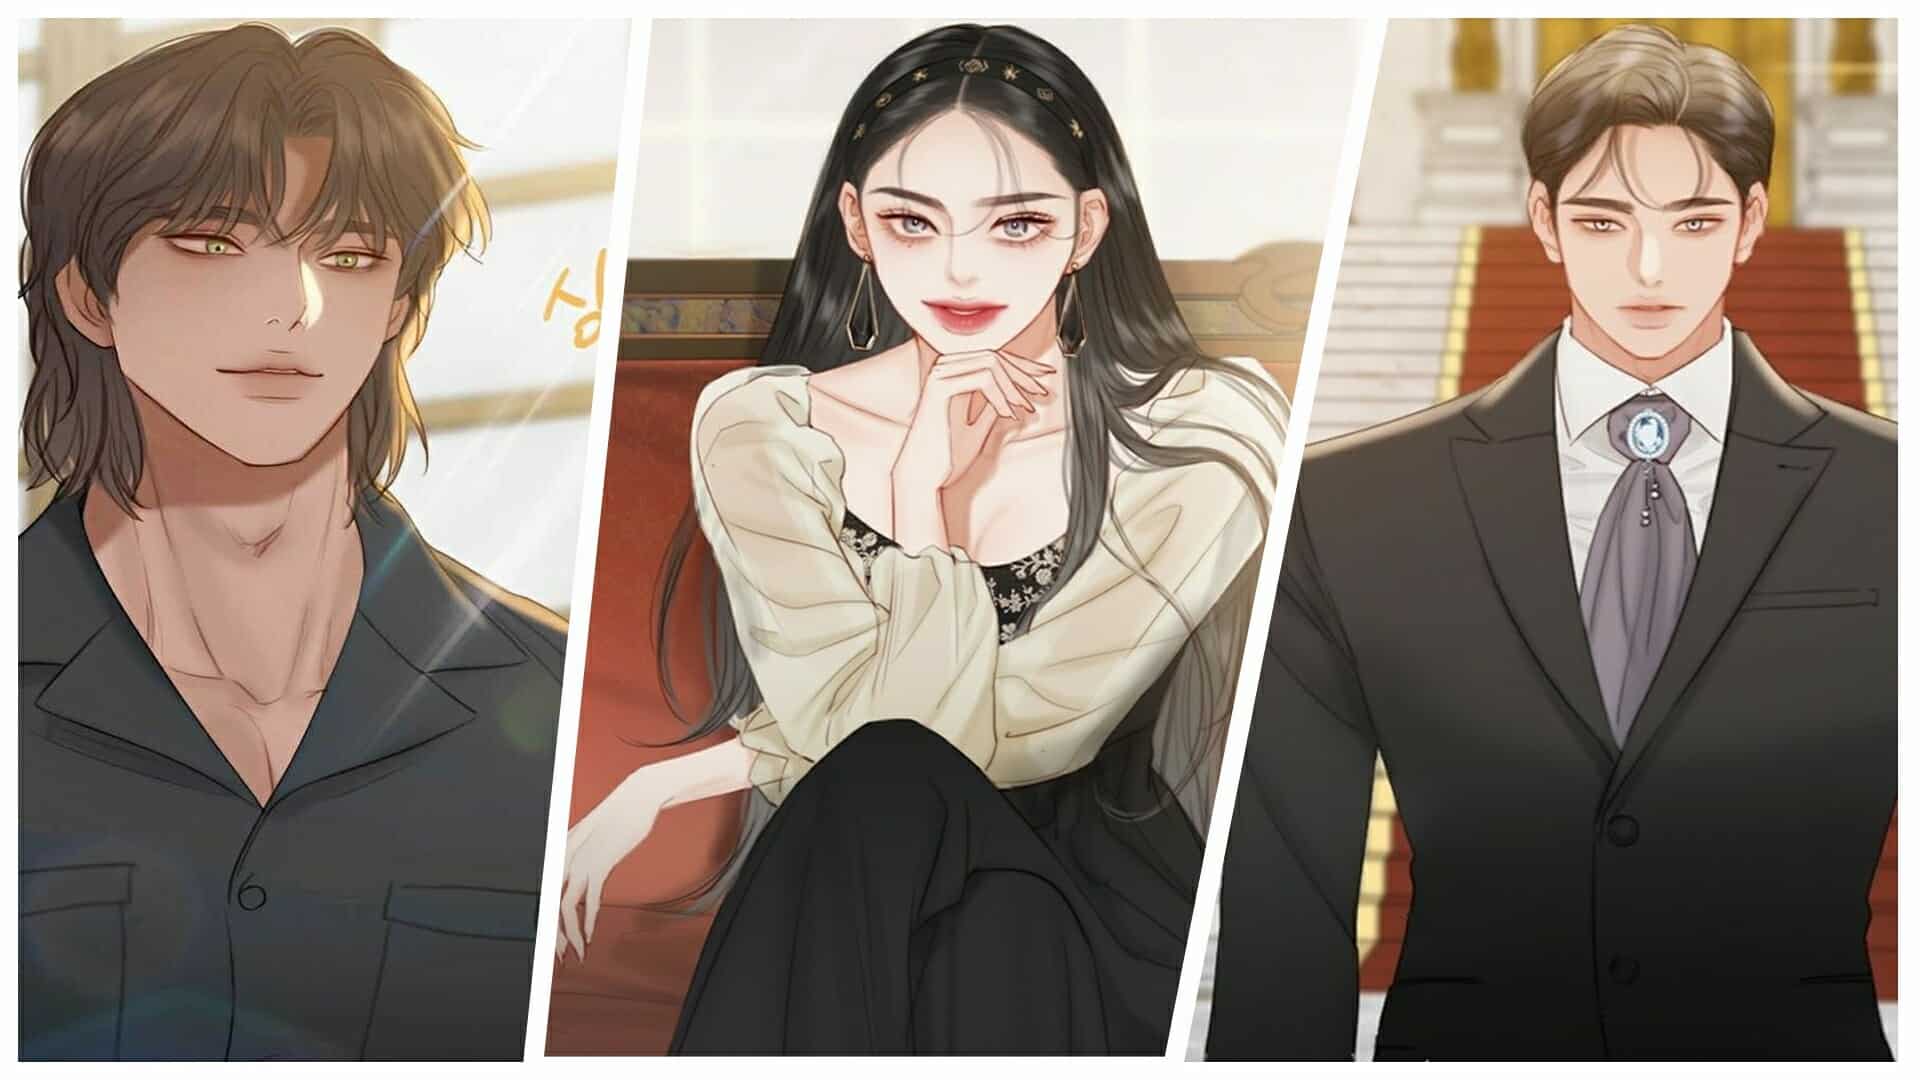 Frederic Bloom (Left), Serena Serenity (Middle), And Eiser Leinz Grayan (Right) - Serena Chapter 1